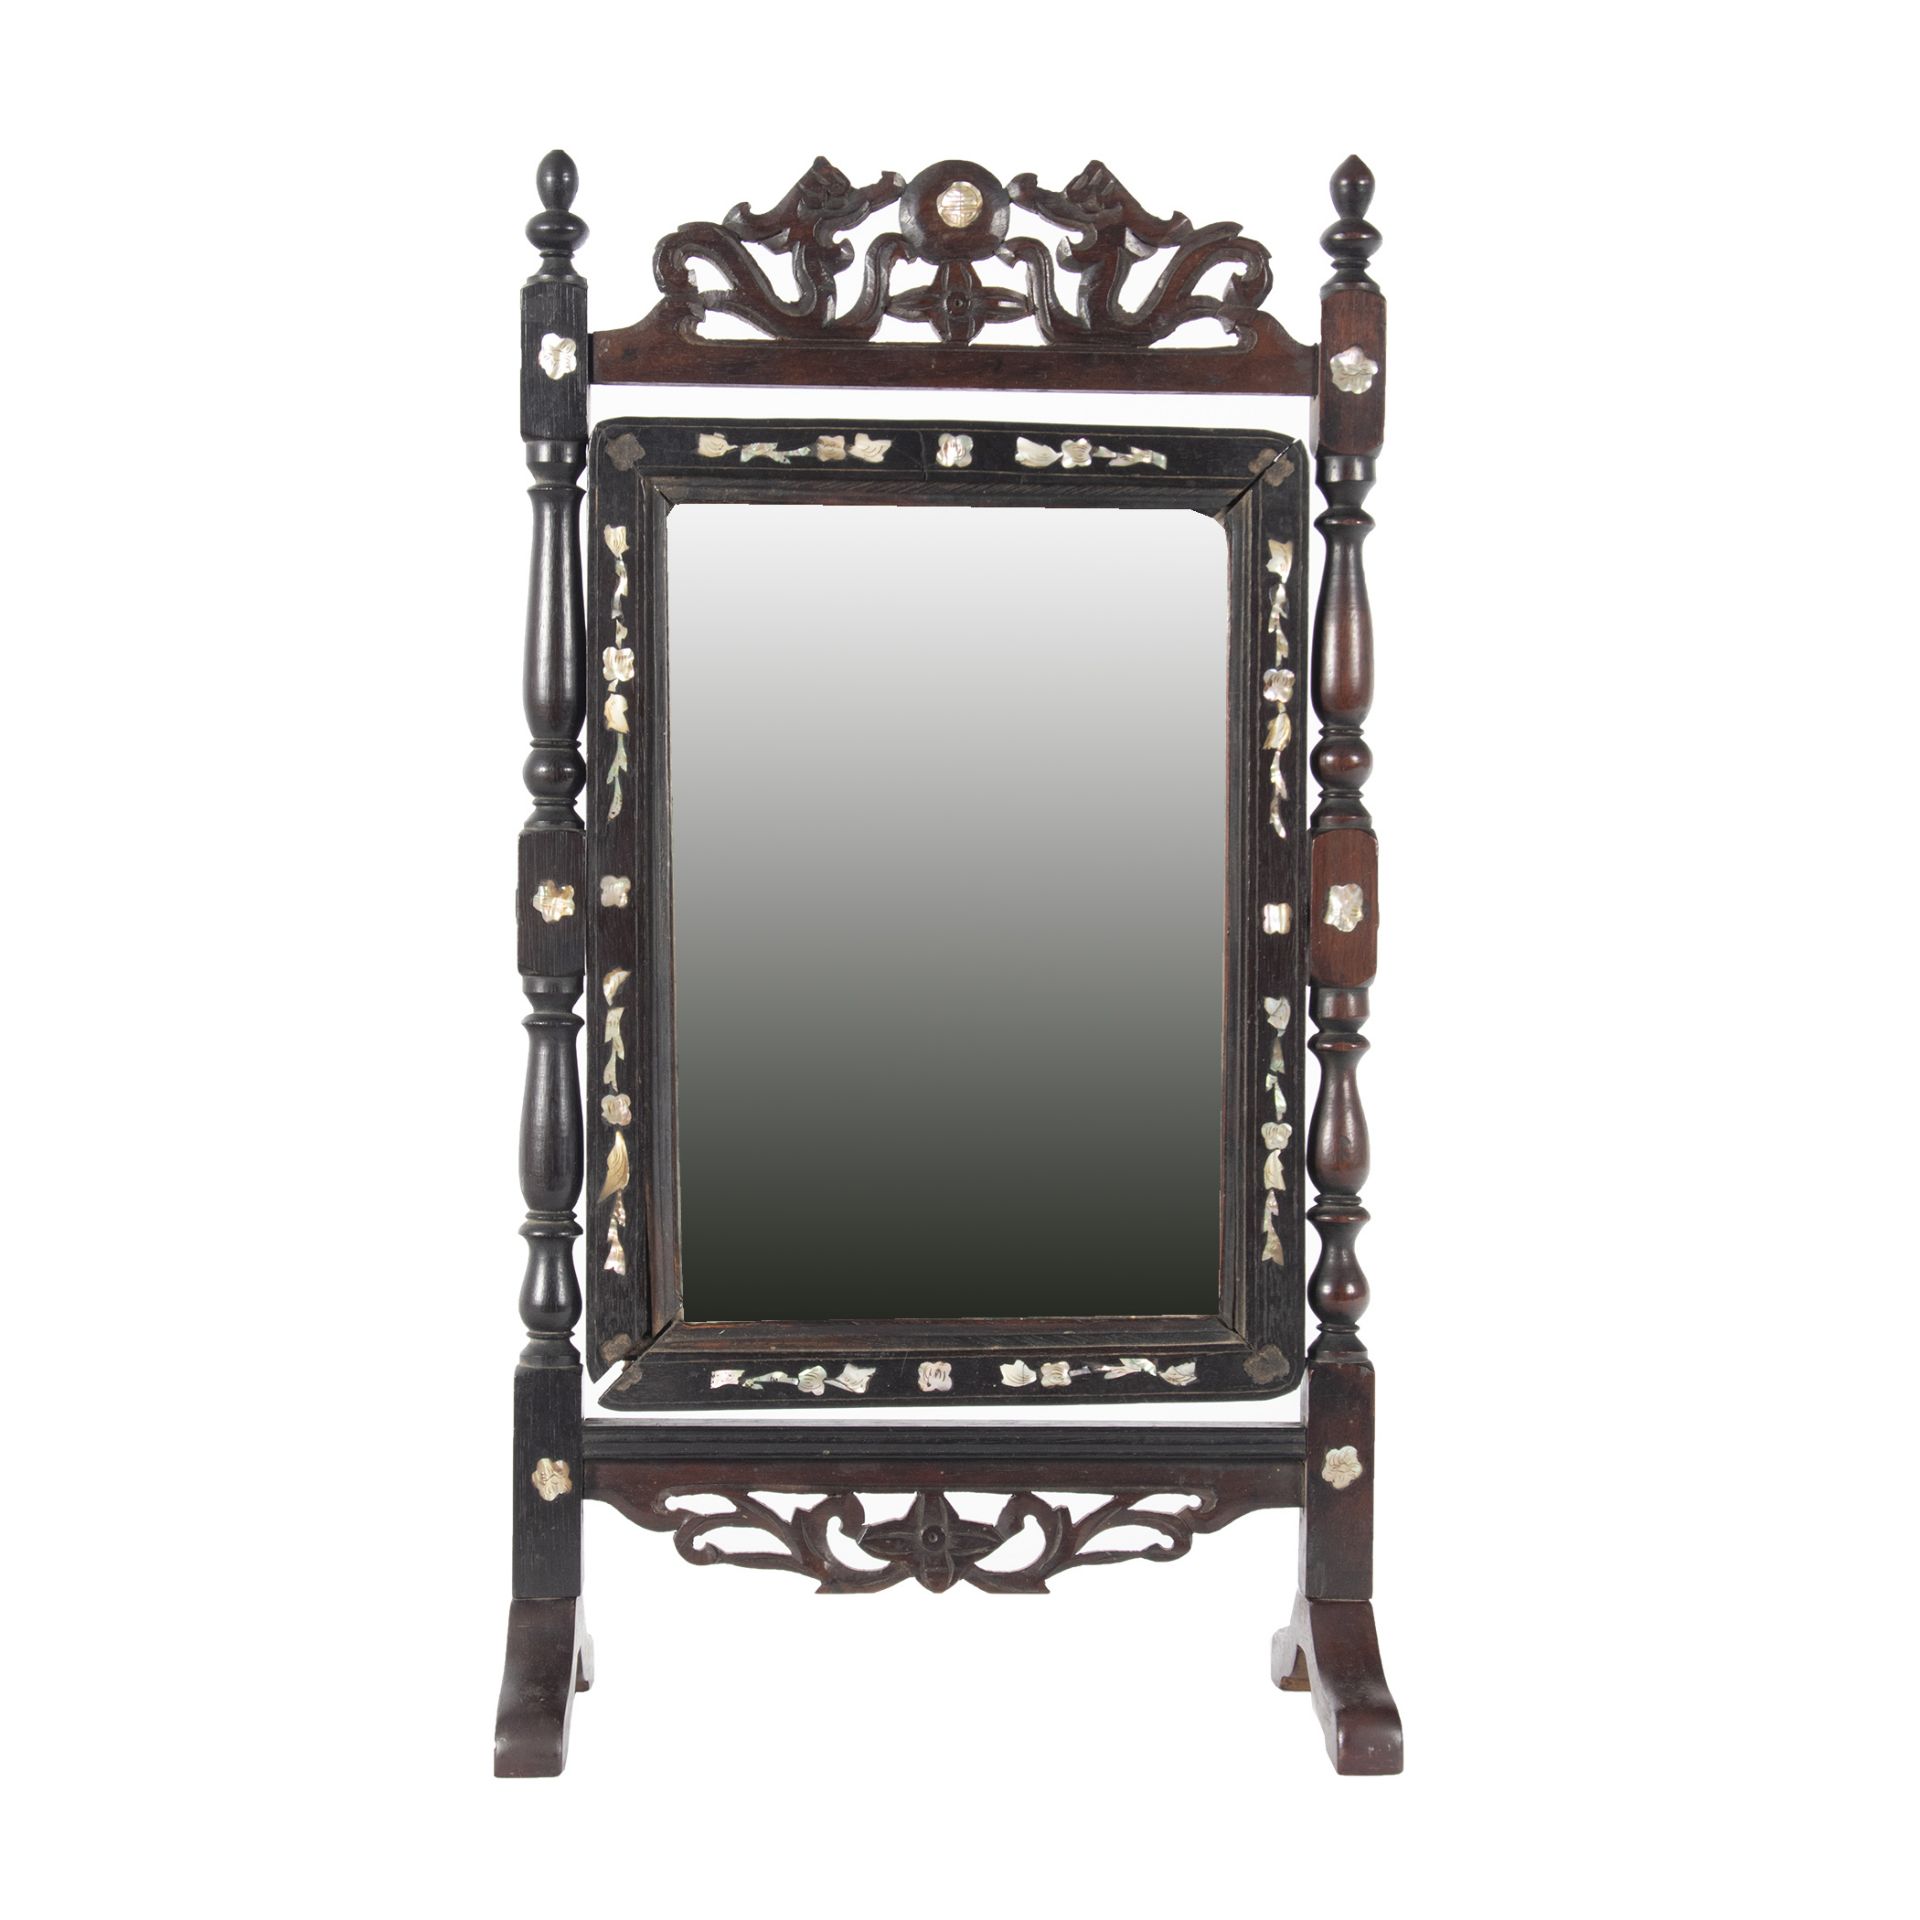 Dressing table mirror. China, early 20th century.